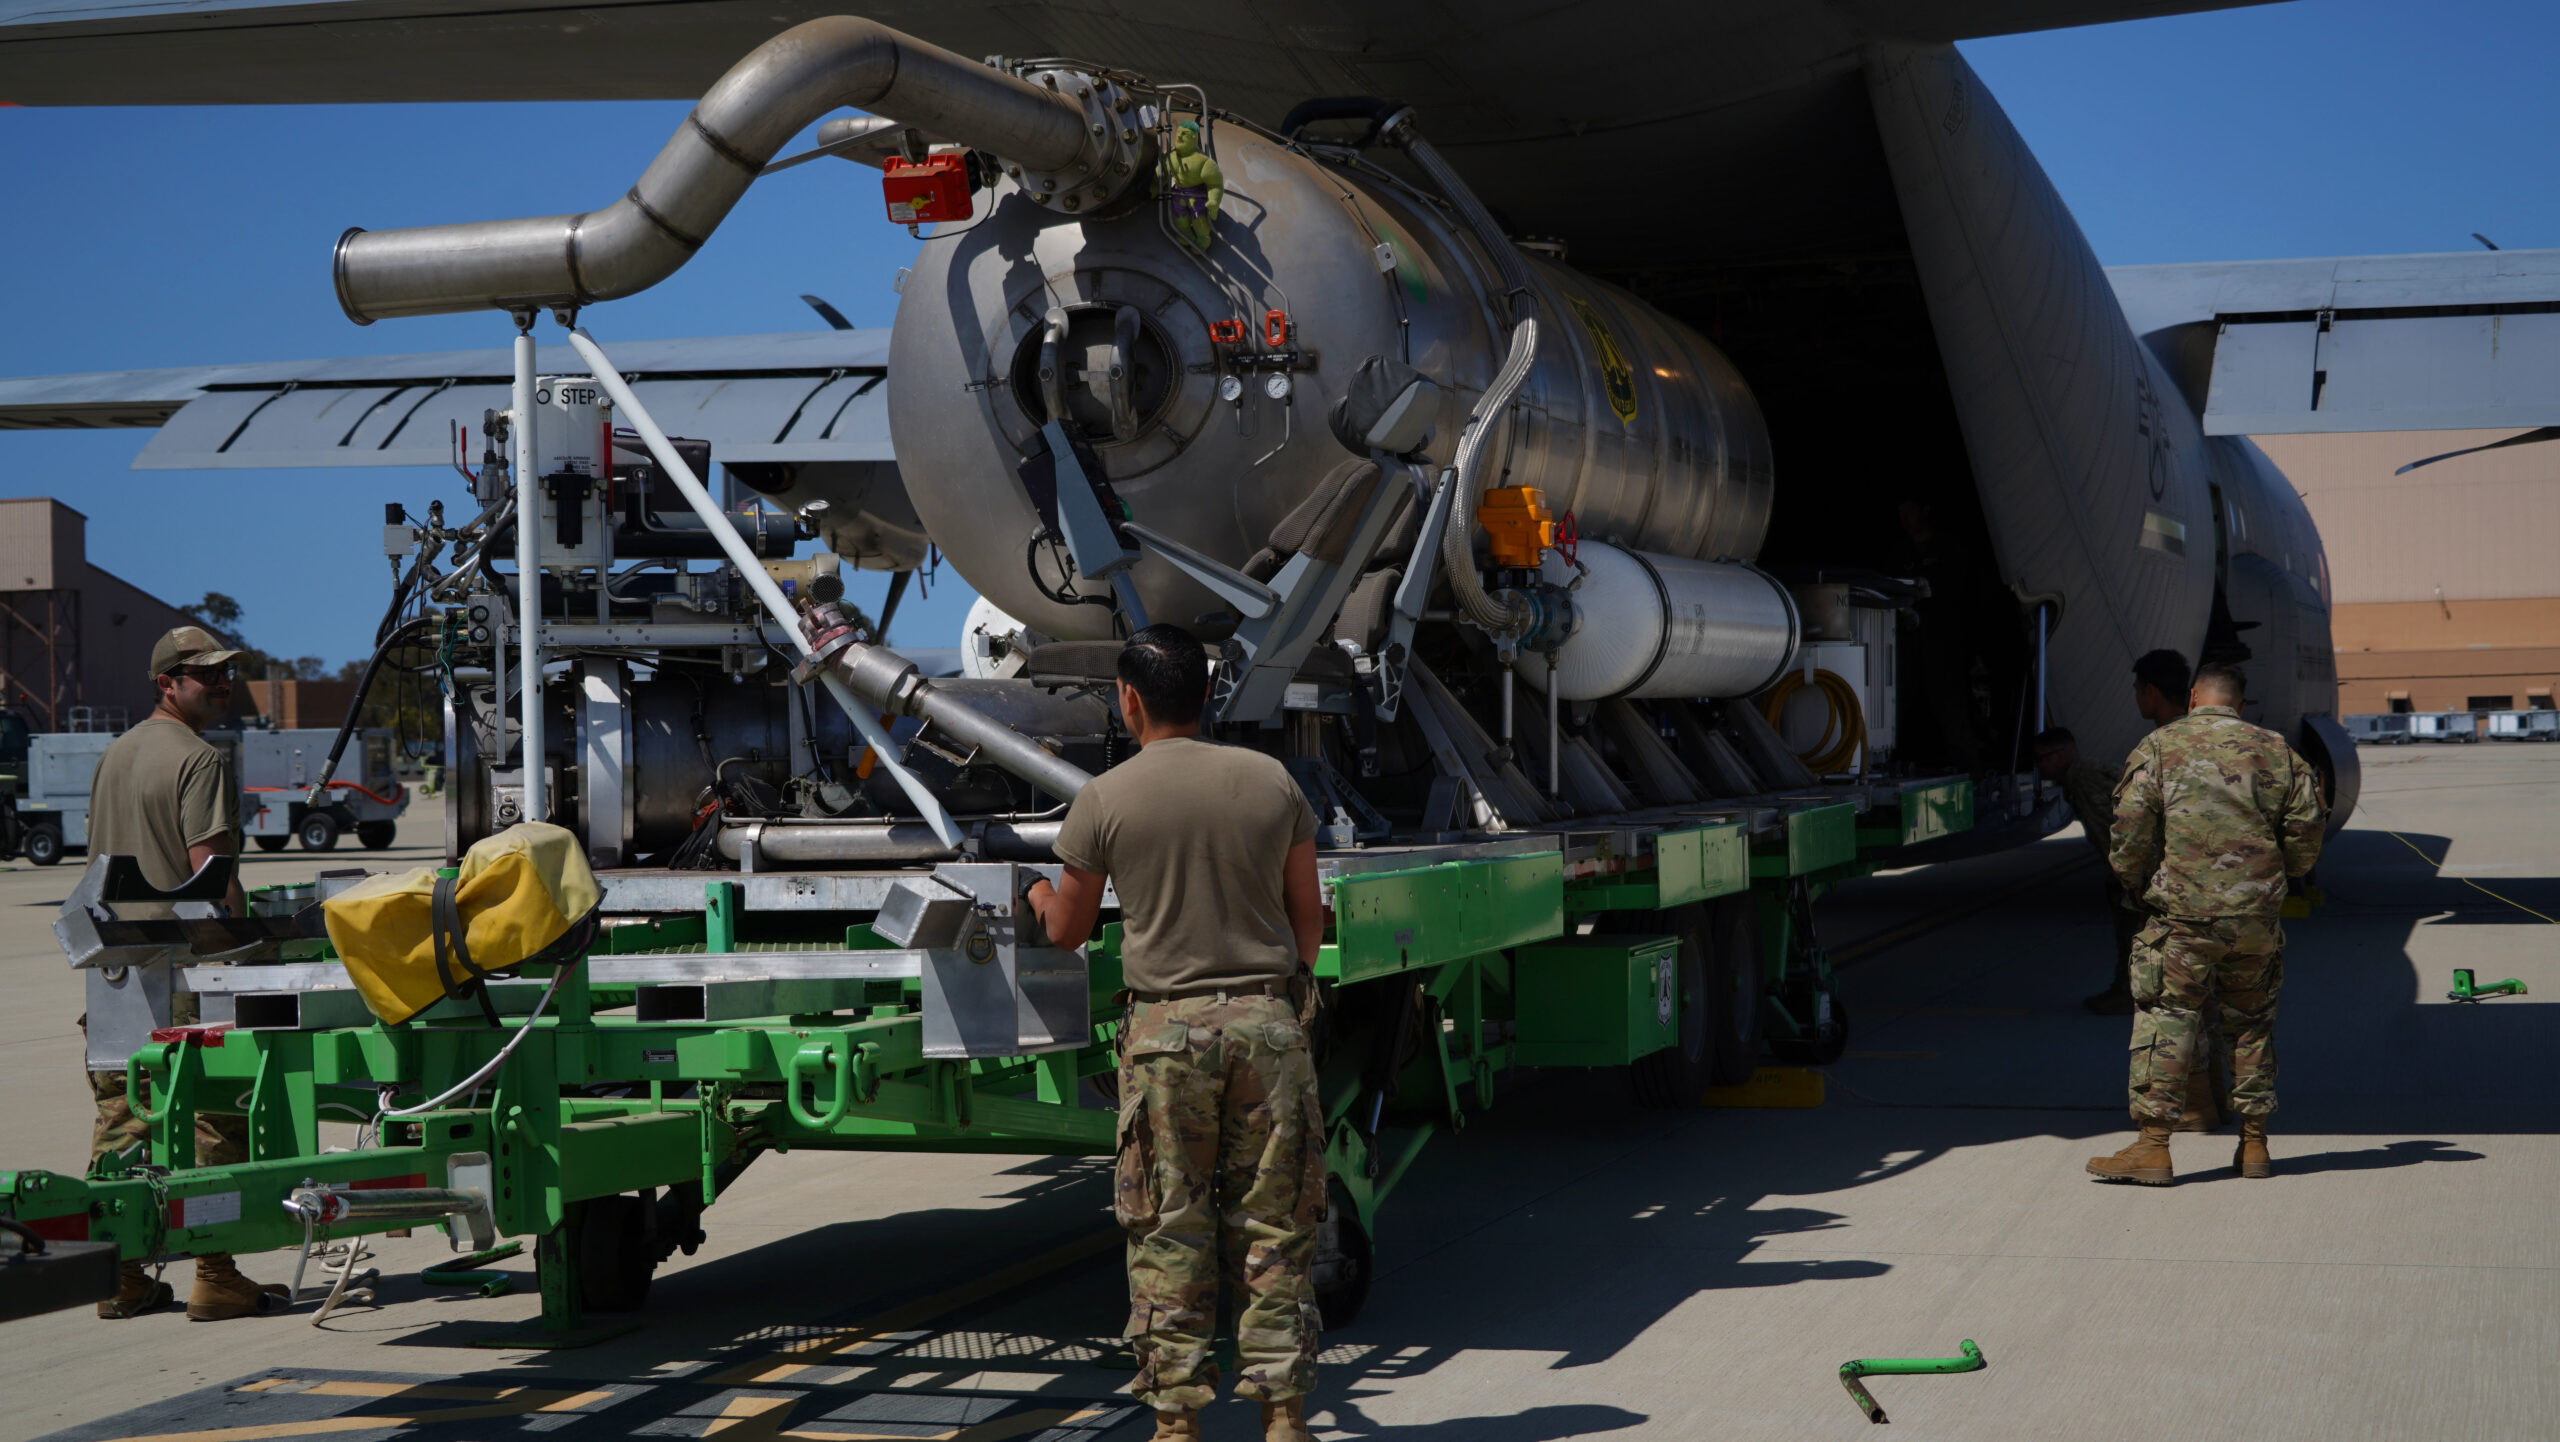 U.S. Air Force personnel from the 146th Airlift Wing load the U.S. Forest Service's Modular Airborne Firefighting System (MAFFS) inside a C-130J Super Hercules aircraft attached to the 115th Airlift Squadron at the Channel Islands Air National Guard Station, Port Hueneme, California, Apri 21, 2022. MAFFS is a portable fire retardant delivery system that can be inserted into an aircraft, temporarily converting it into a fire fighting airtanker that can lay retardant lines to help control wildfires. The MAFFS program has been a partnership between the U.S. Forest Service and the Department of Defense since the early 1970s. (U.S. Air National Guard photo by Staff Sgt. Michelle Ulber)